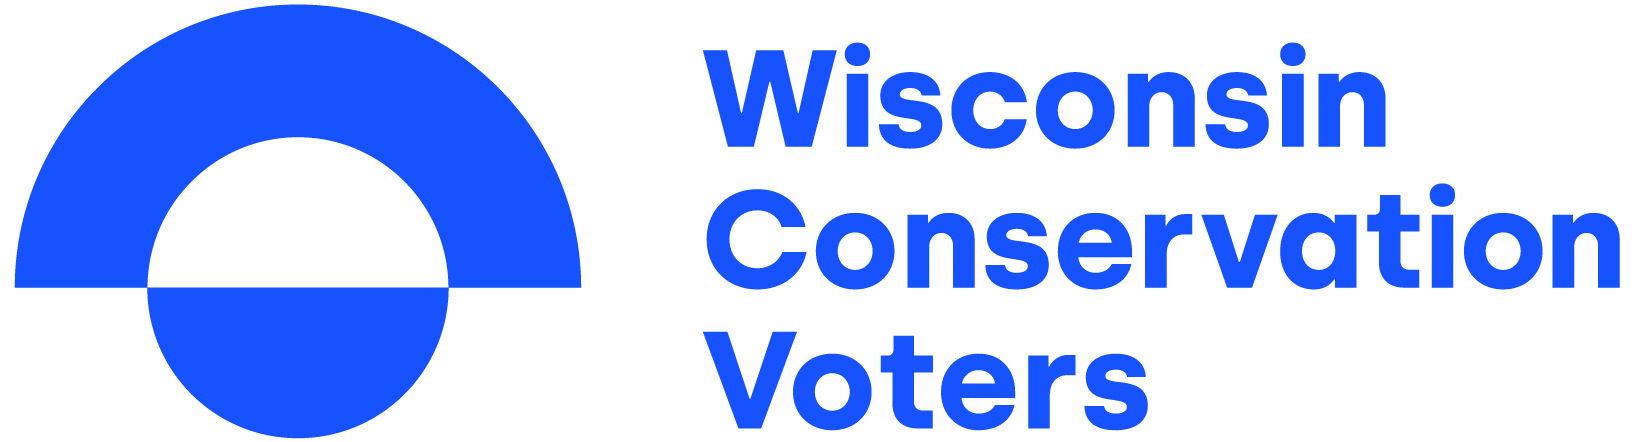 Wisconsin Conservation Voters (Copy)